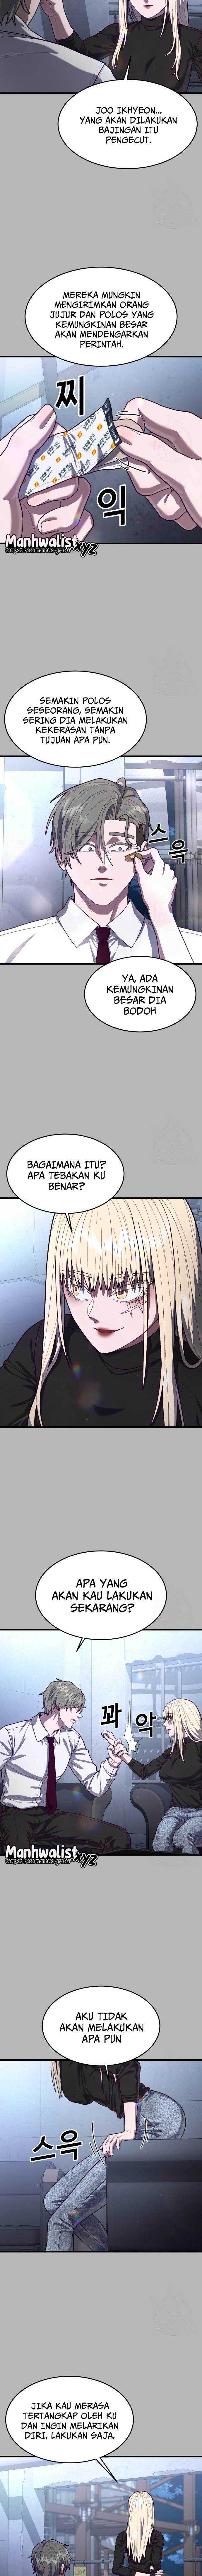 Absolute Obedience Chapter 67